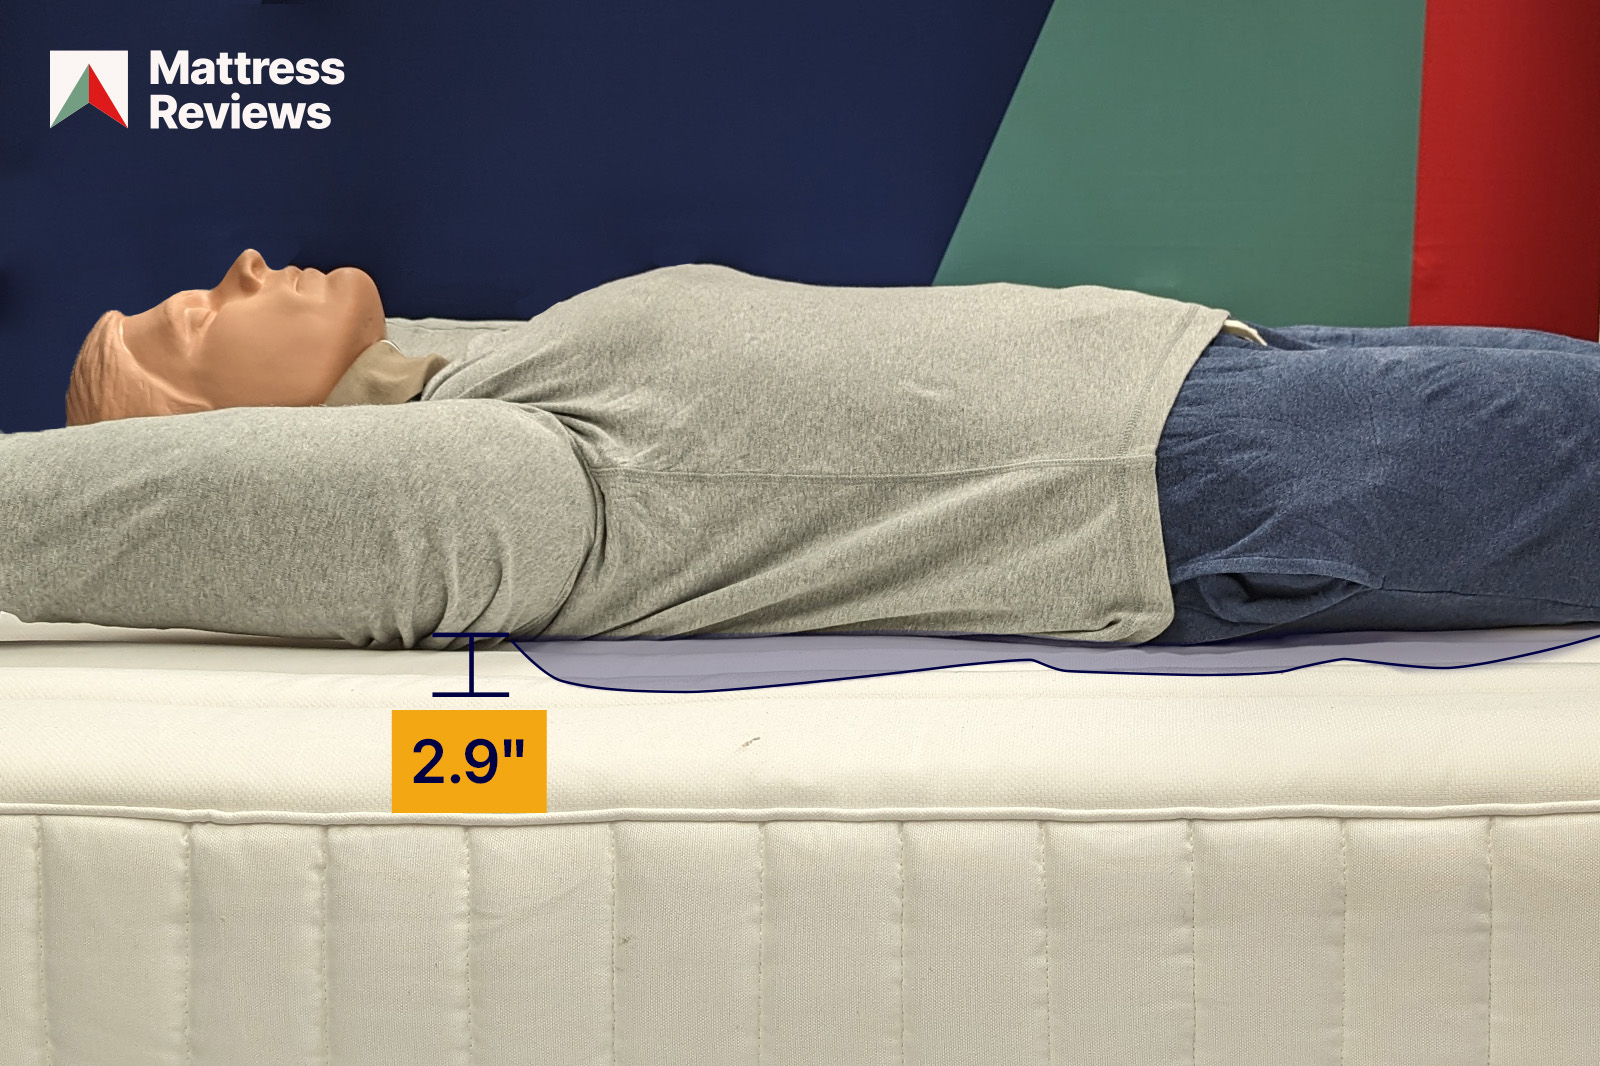 photo of a mannequin laying down on the IKEA Valevag mattress to show an impression that is 2.9 inches deep